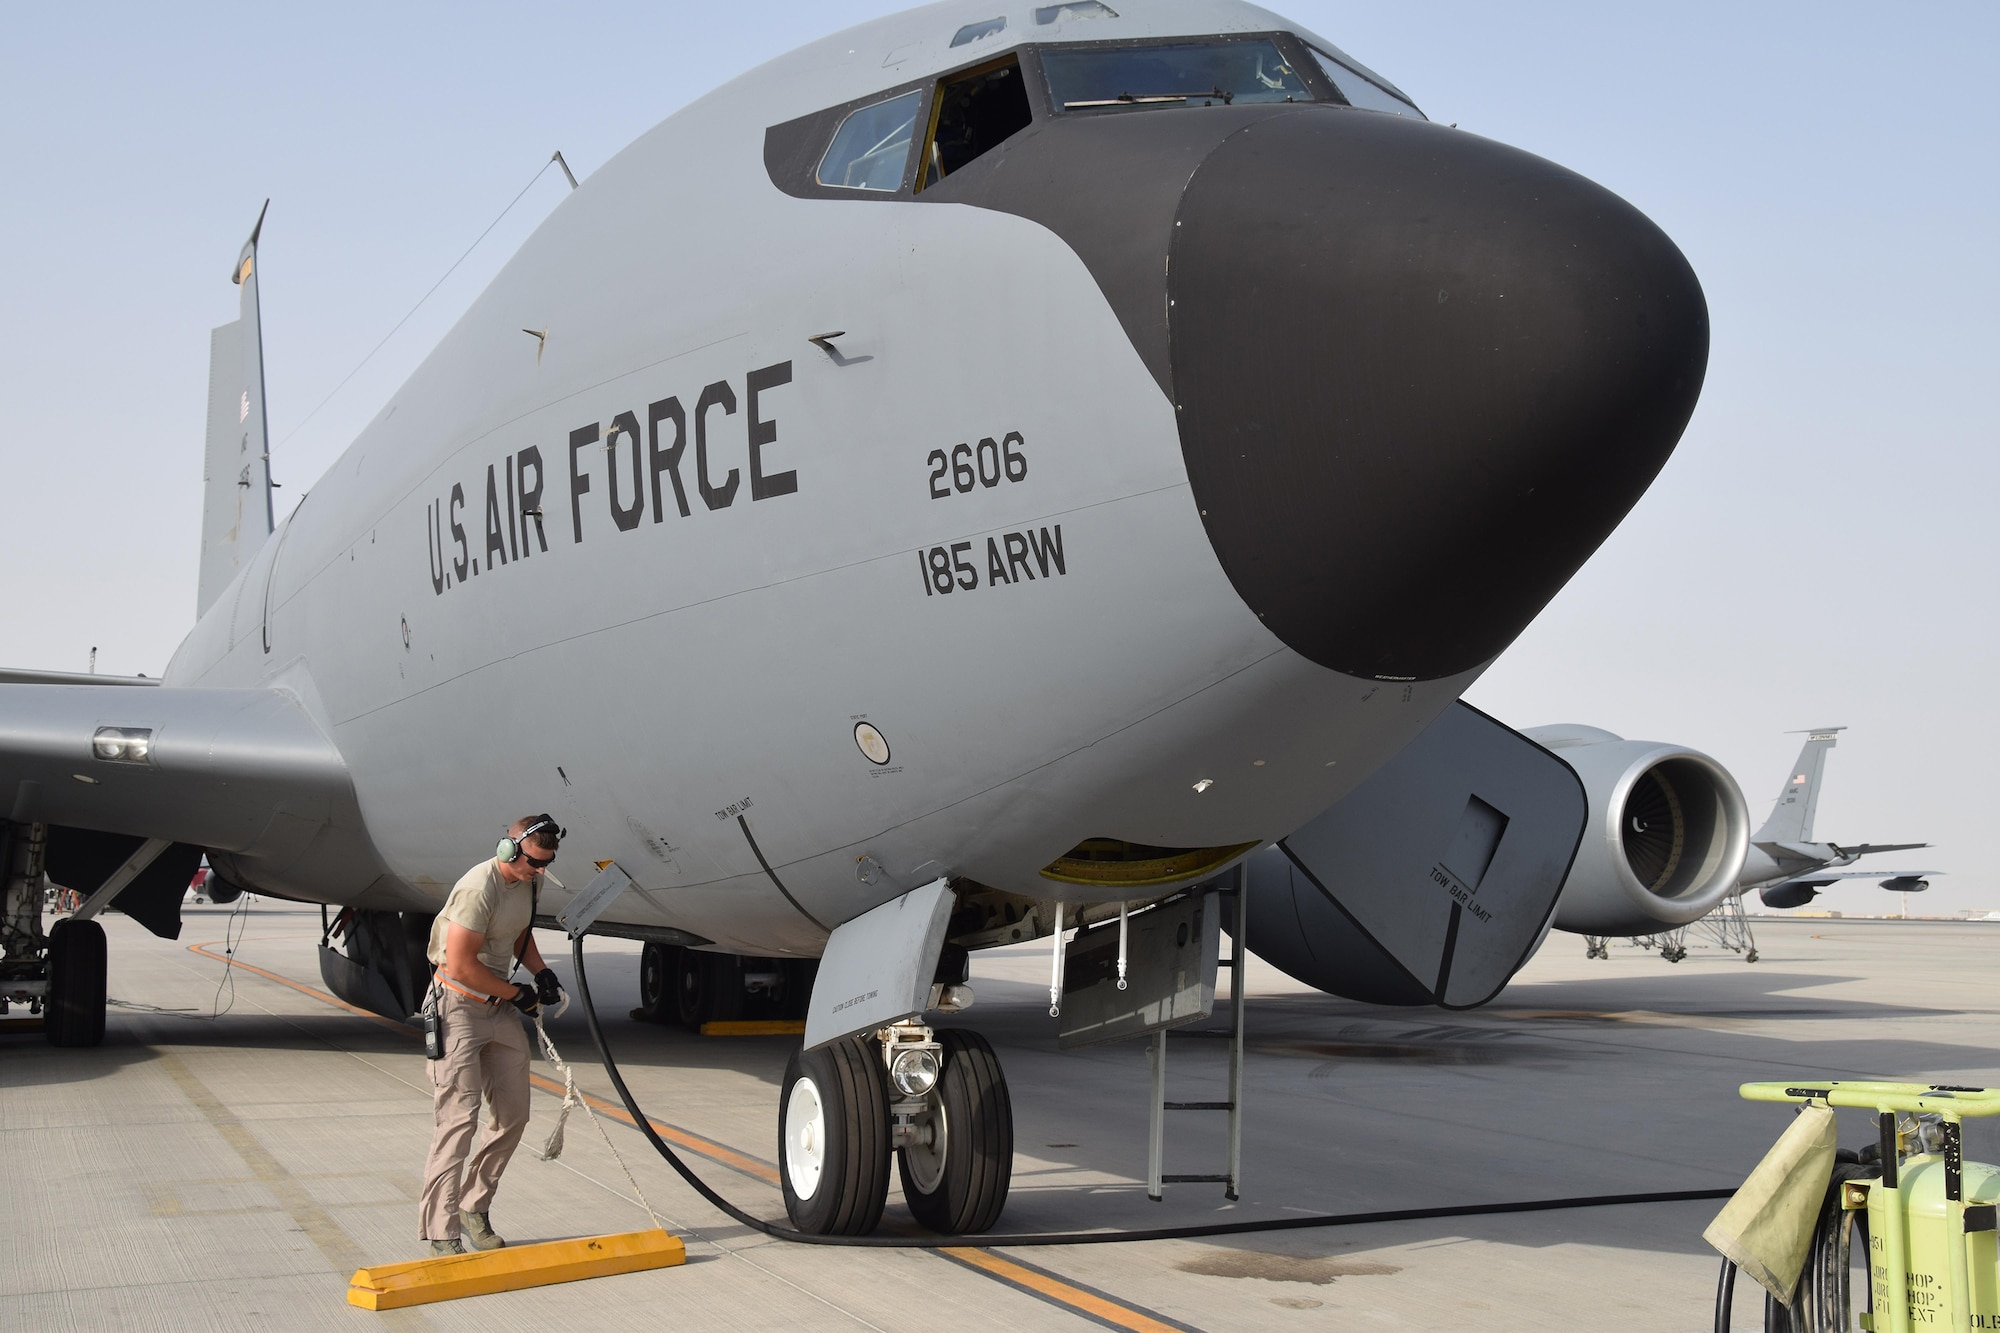 Staff Sgt. Ryan Feeney, 340th Expeditionary Aircraft Maintenance Unit crew chief, places a tire chalk in front of a KC-135 Stratotanker, tail 2606 from the Iowa Air National Guard, before an upcoming mission June 1, 2016, at Al Udeid Air Base, Qatar. Airmen from the 340th AMU conduct repairs and perform a variety of maintenance tasks to prepare the aircraft for in-air refueling missions. Feeney is attached to the 379th Air Expeditionary Wing and hails from Bangor Air National Guard Base, Maine. (U.S. Air Force photo by Technical Sgt. Carlos J. Trevino/Released)